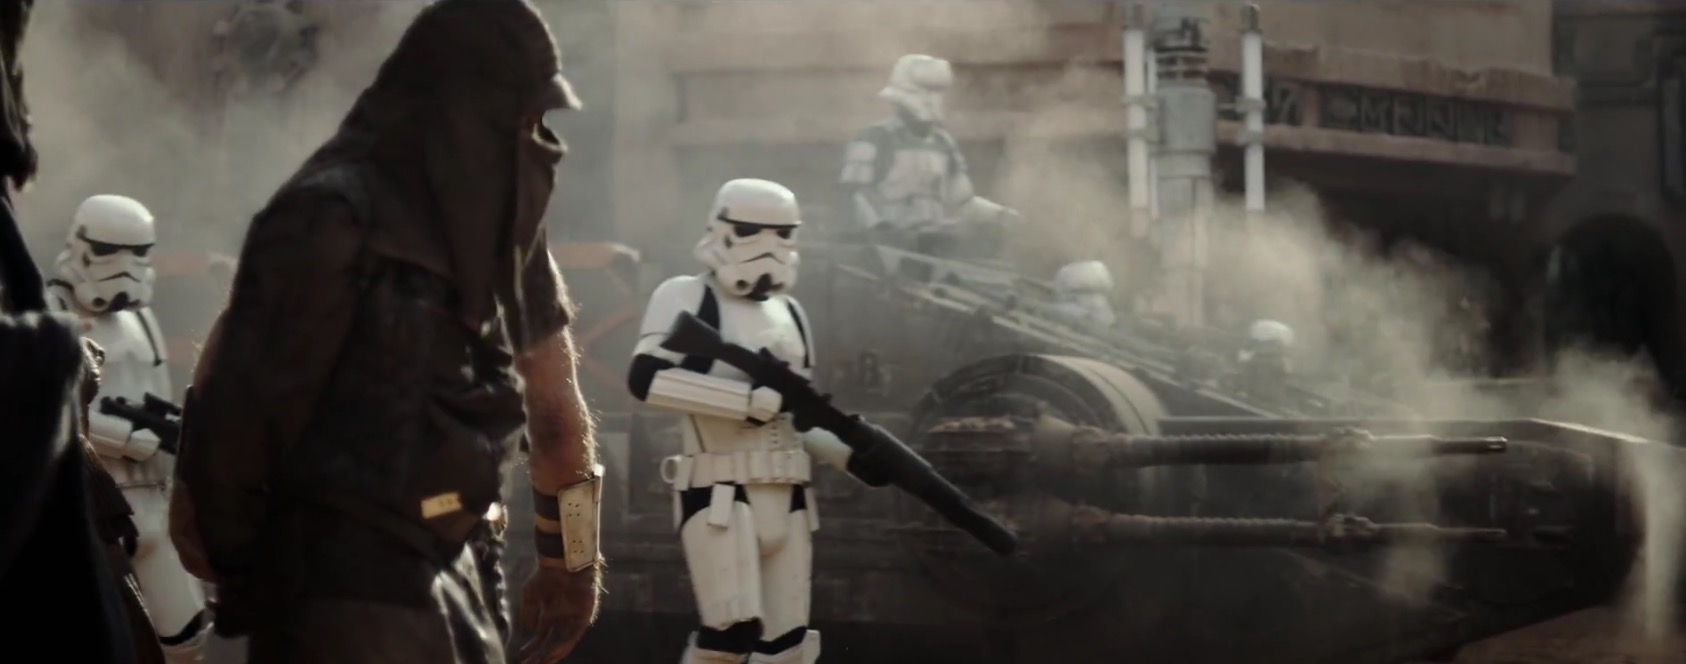 Every Cool Detail We Spotted In The Rogue One: A Star Wars Story Trailer